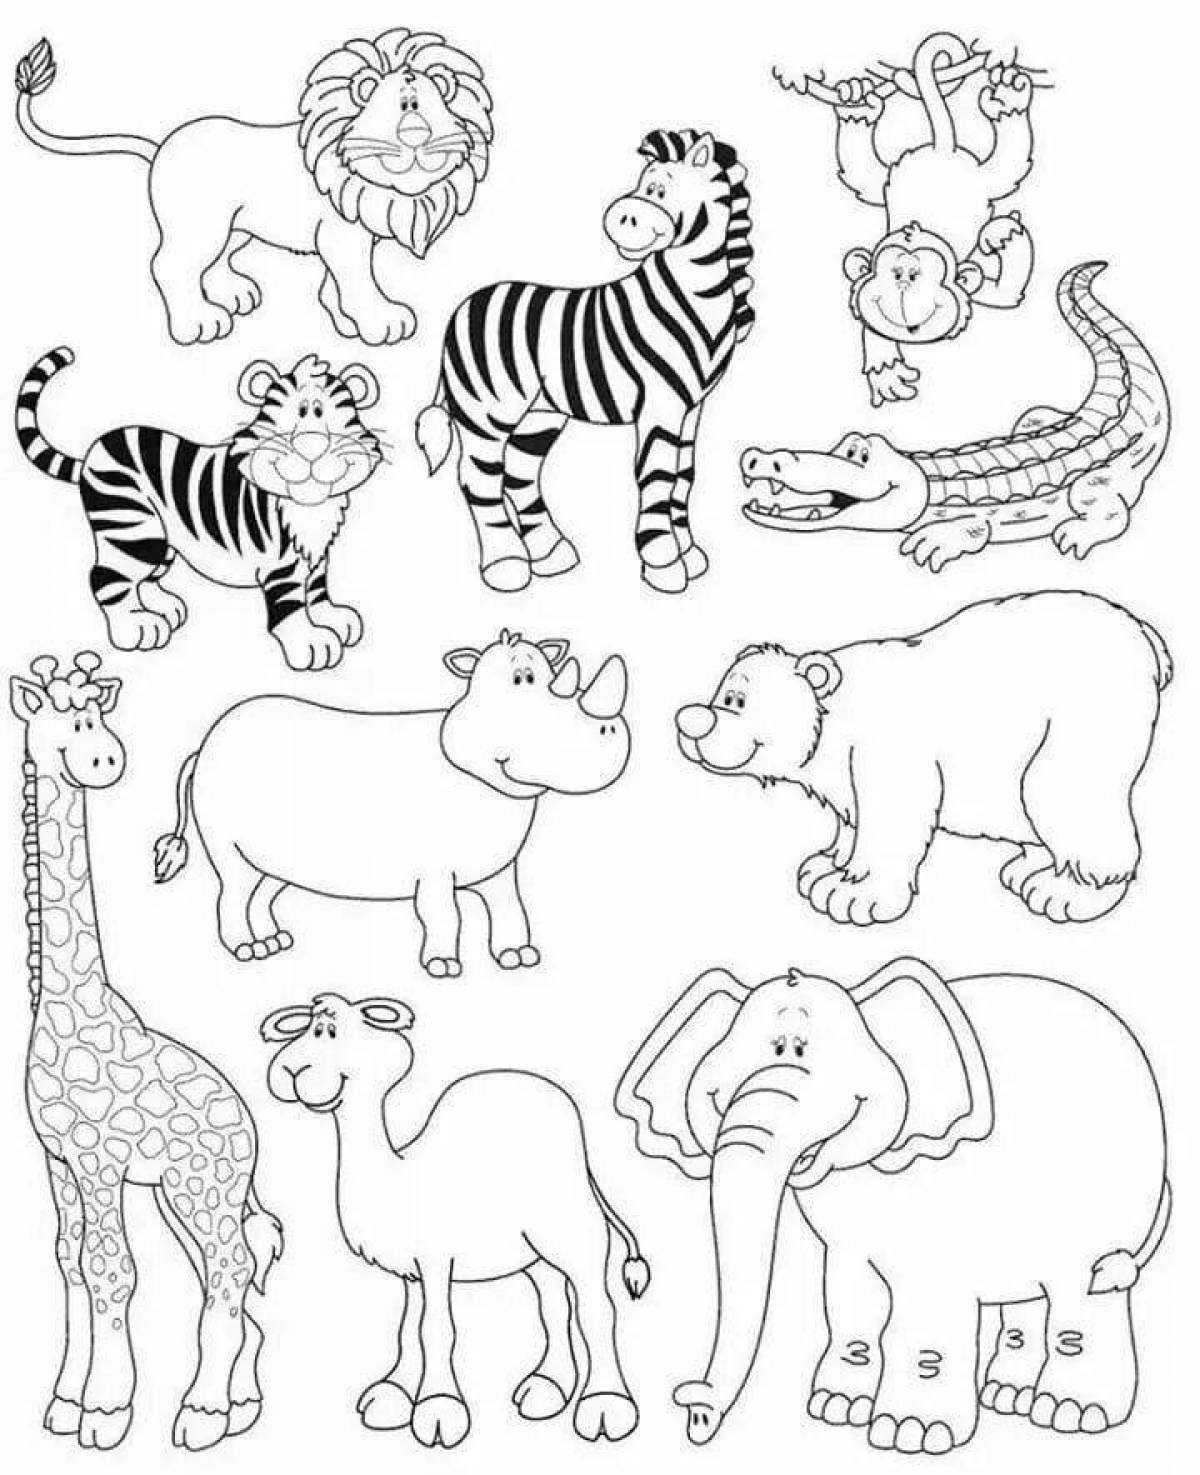 Bright coloring for children animals of hot countries